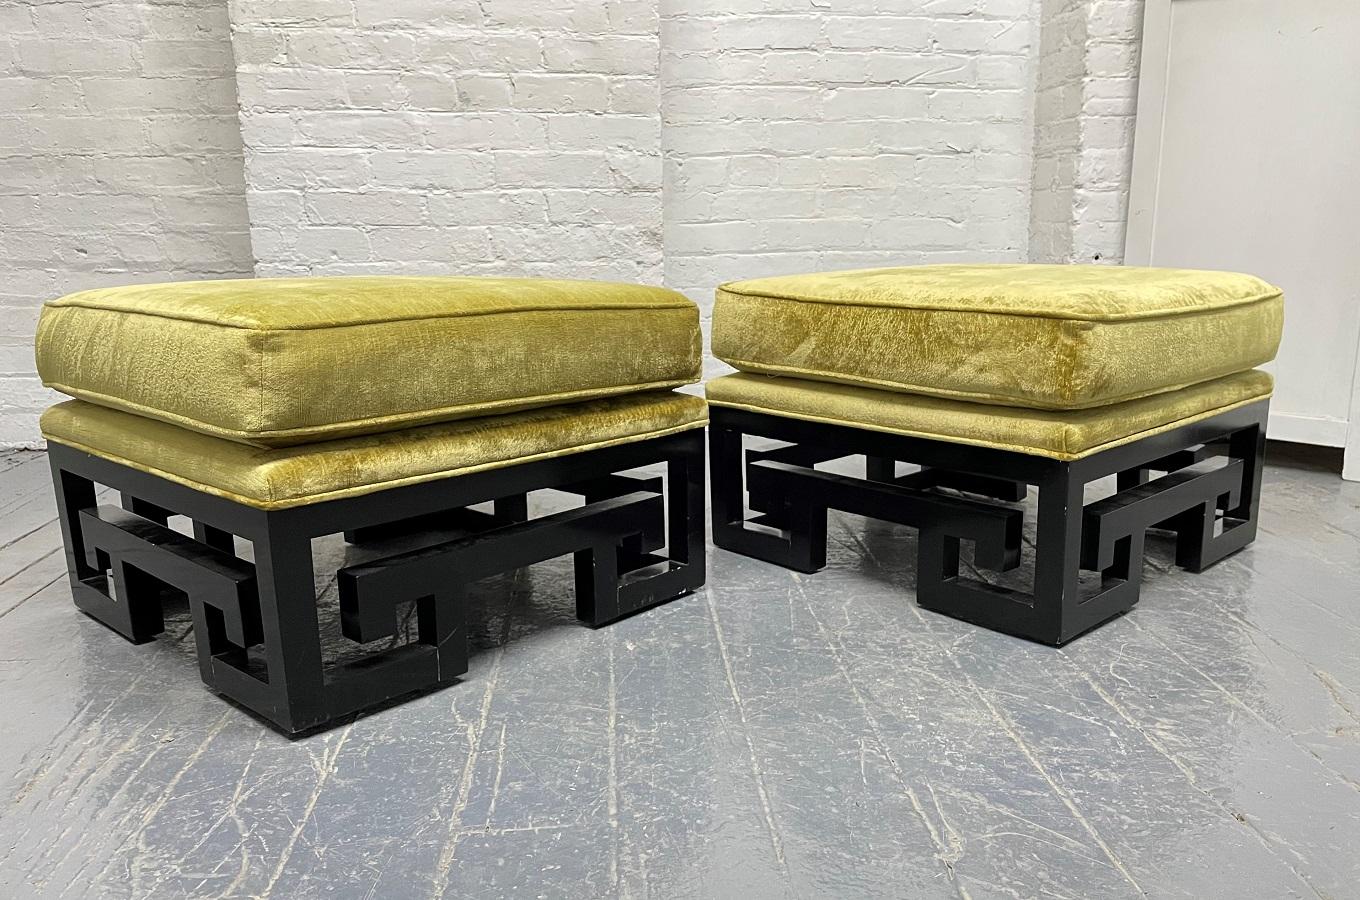 Pair of James Mont style Asian inspired benches with black lacquered bases. Has the original fabric.